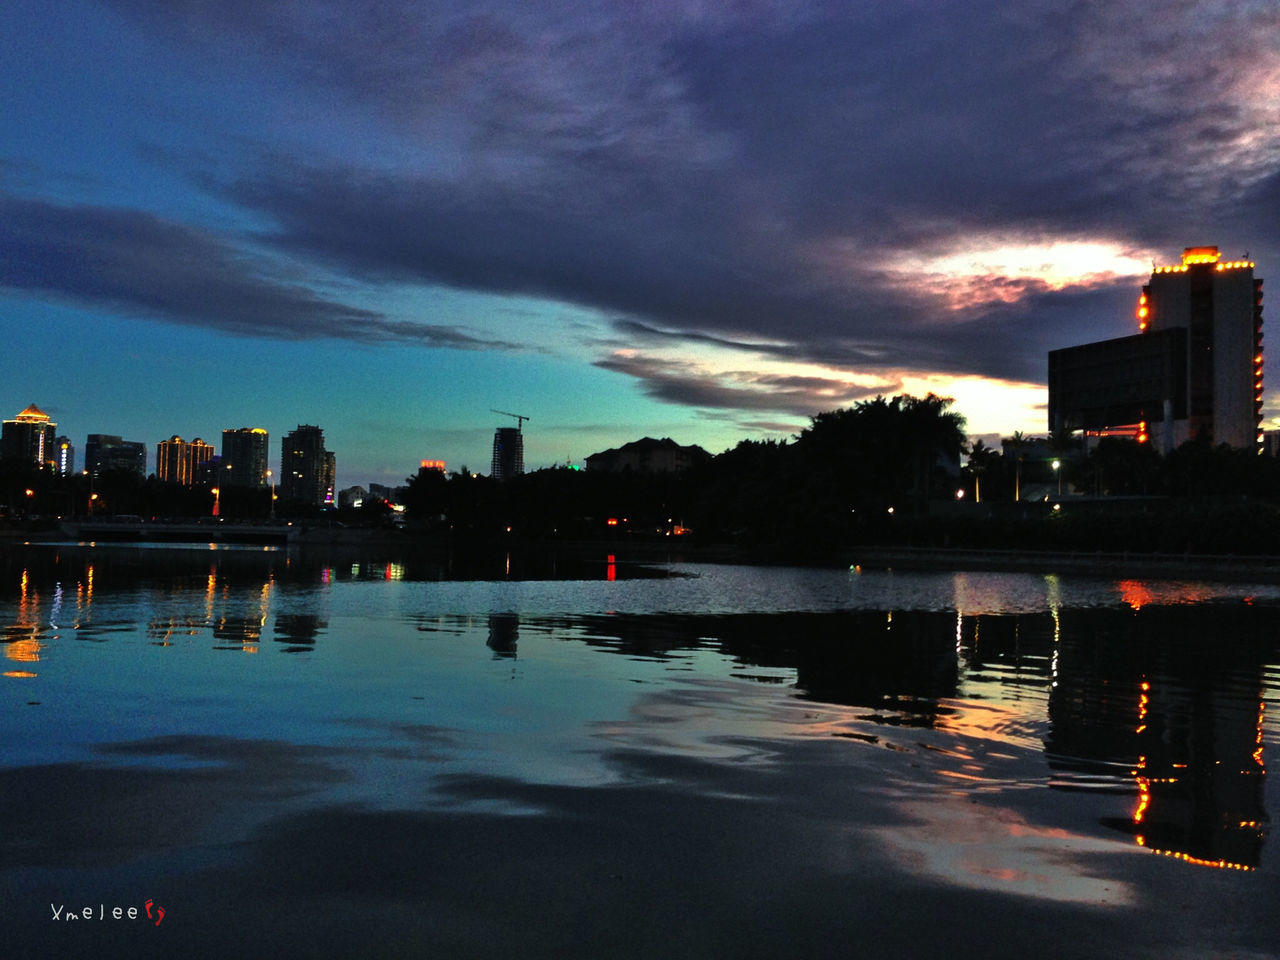 water, sky, building exterior, cloud - sky, sunset, reflection, architecture, waterfront, built structure, city, illuminated, cloudy, silhouette, dusk, river, lake, cloud, dramatic sky, weather, scenics